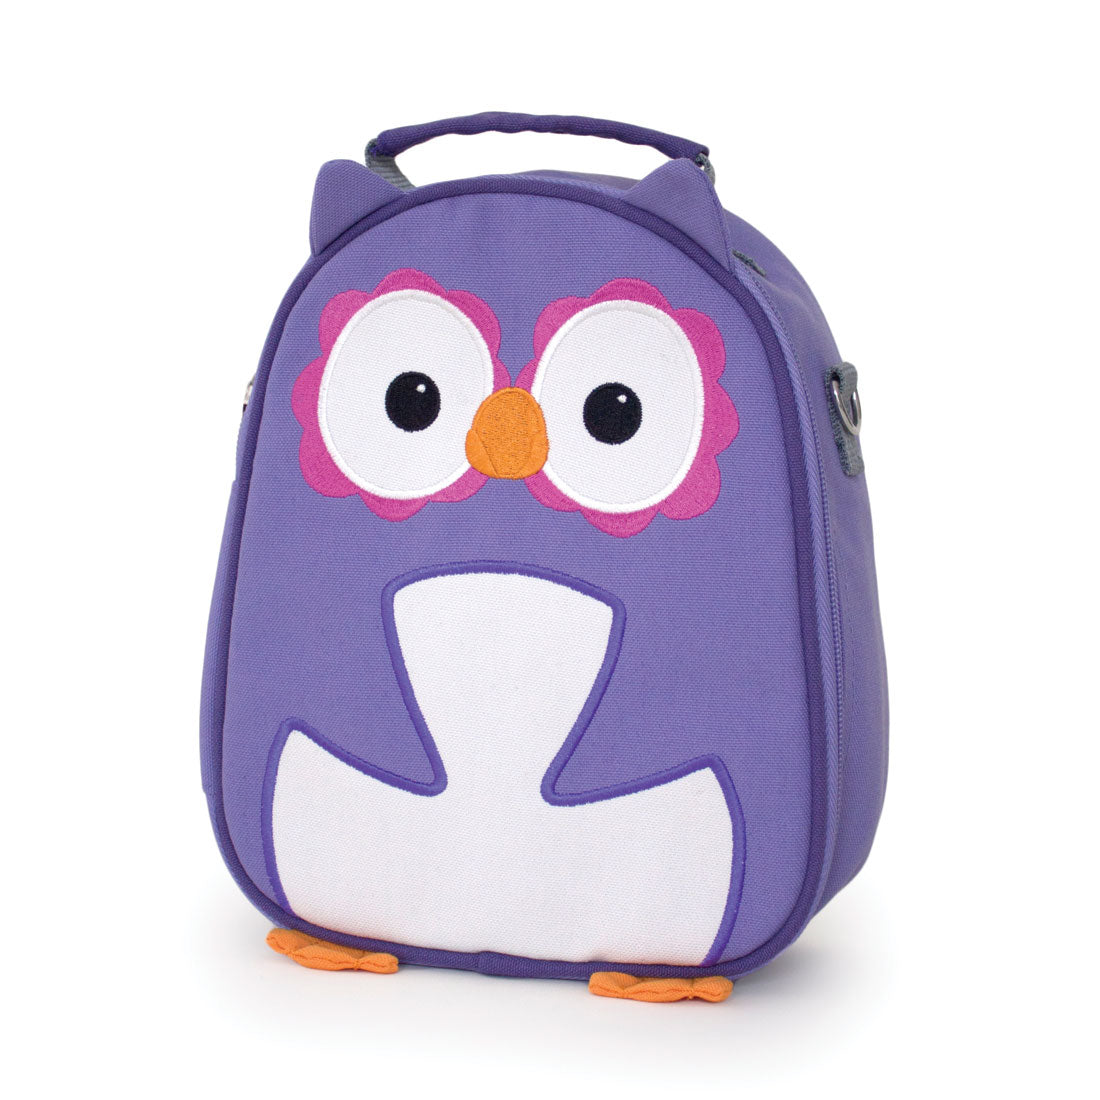 Recycled Fabric Lunch Pack - Purple Owl